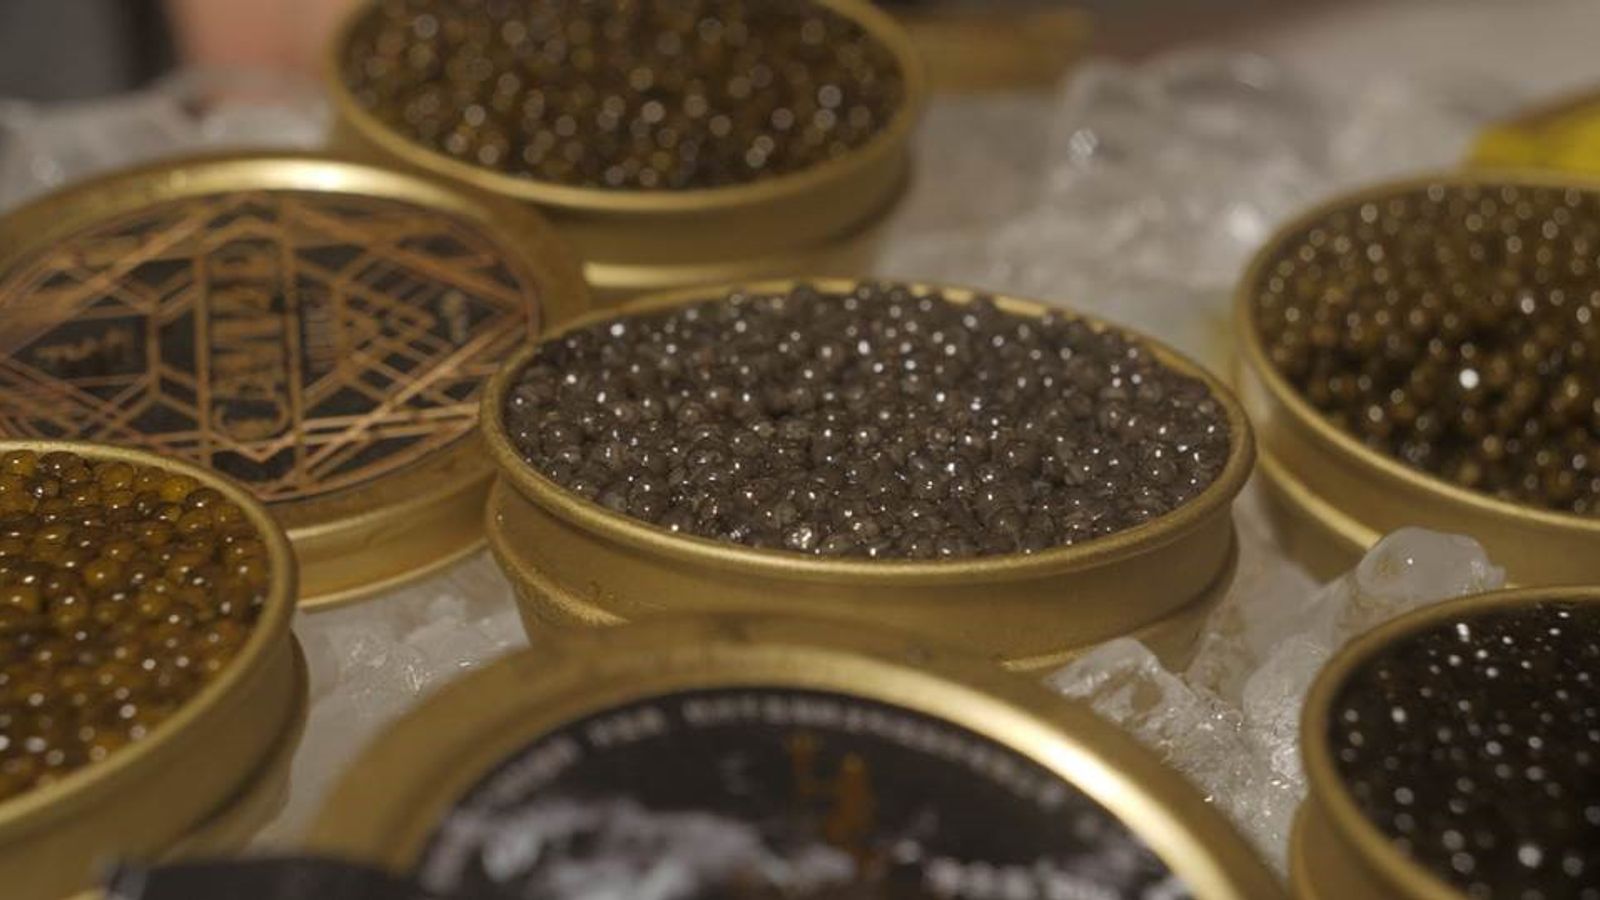 Caviar for the masses? China certainly thinks so